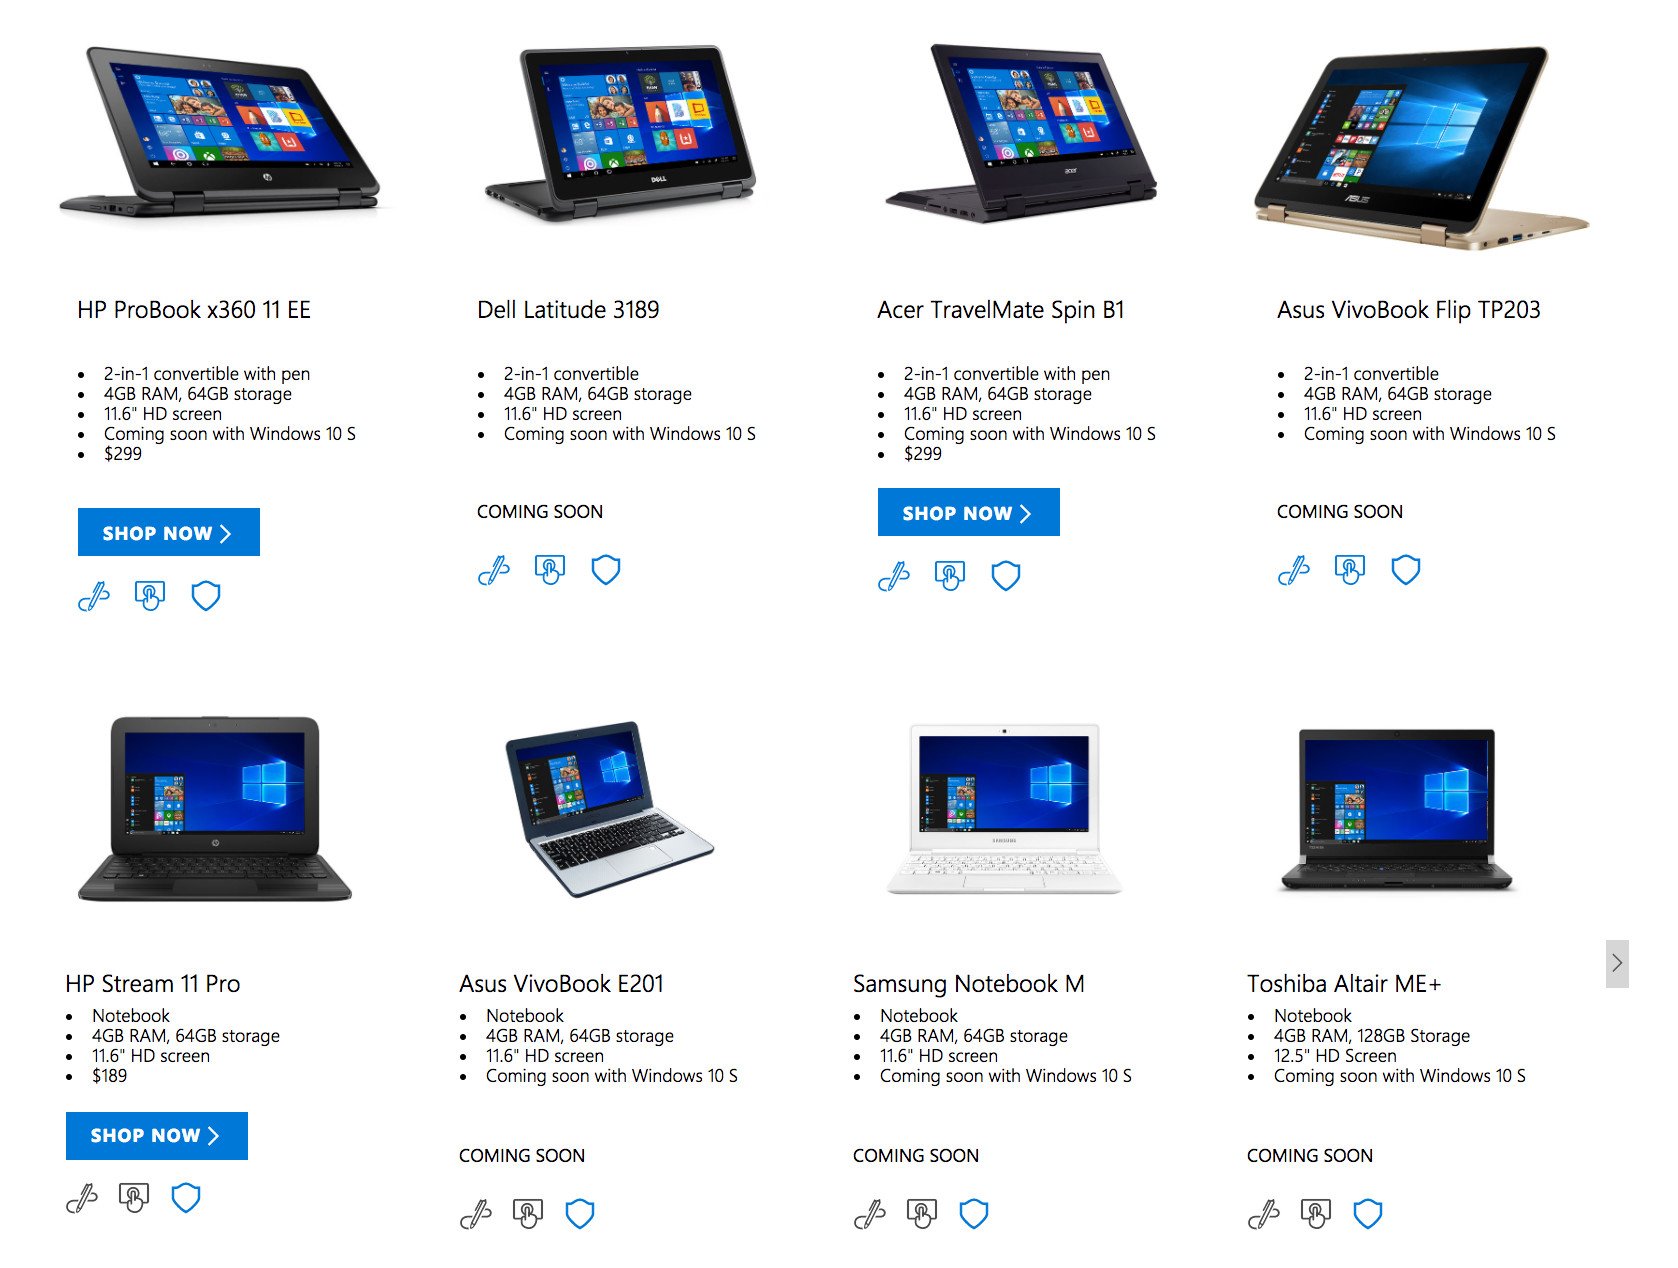 Microsoft shows off Windows 10 S laptops from Acer, HP, Dell and others